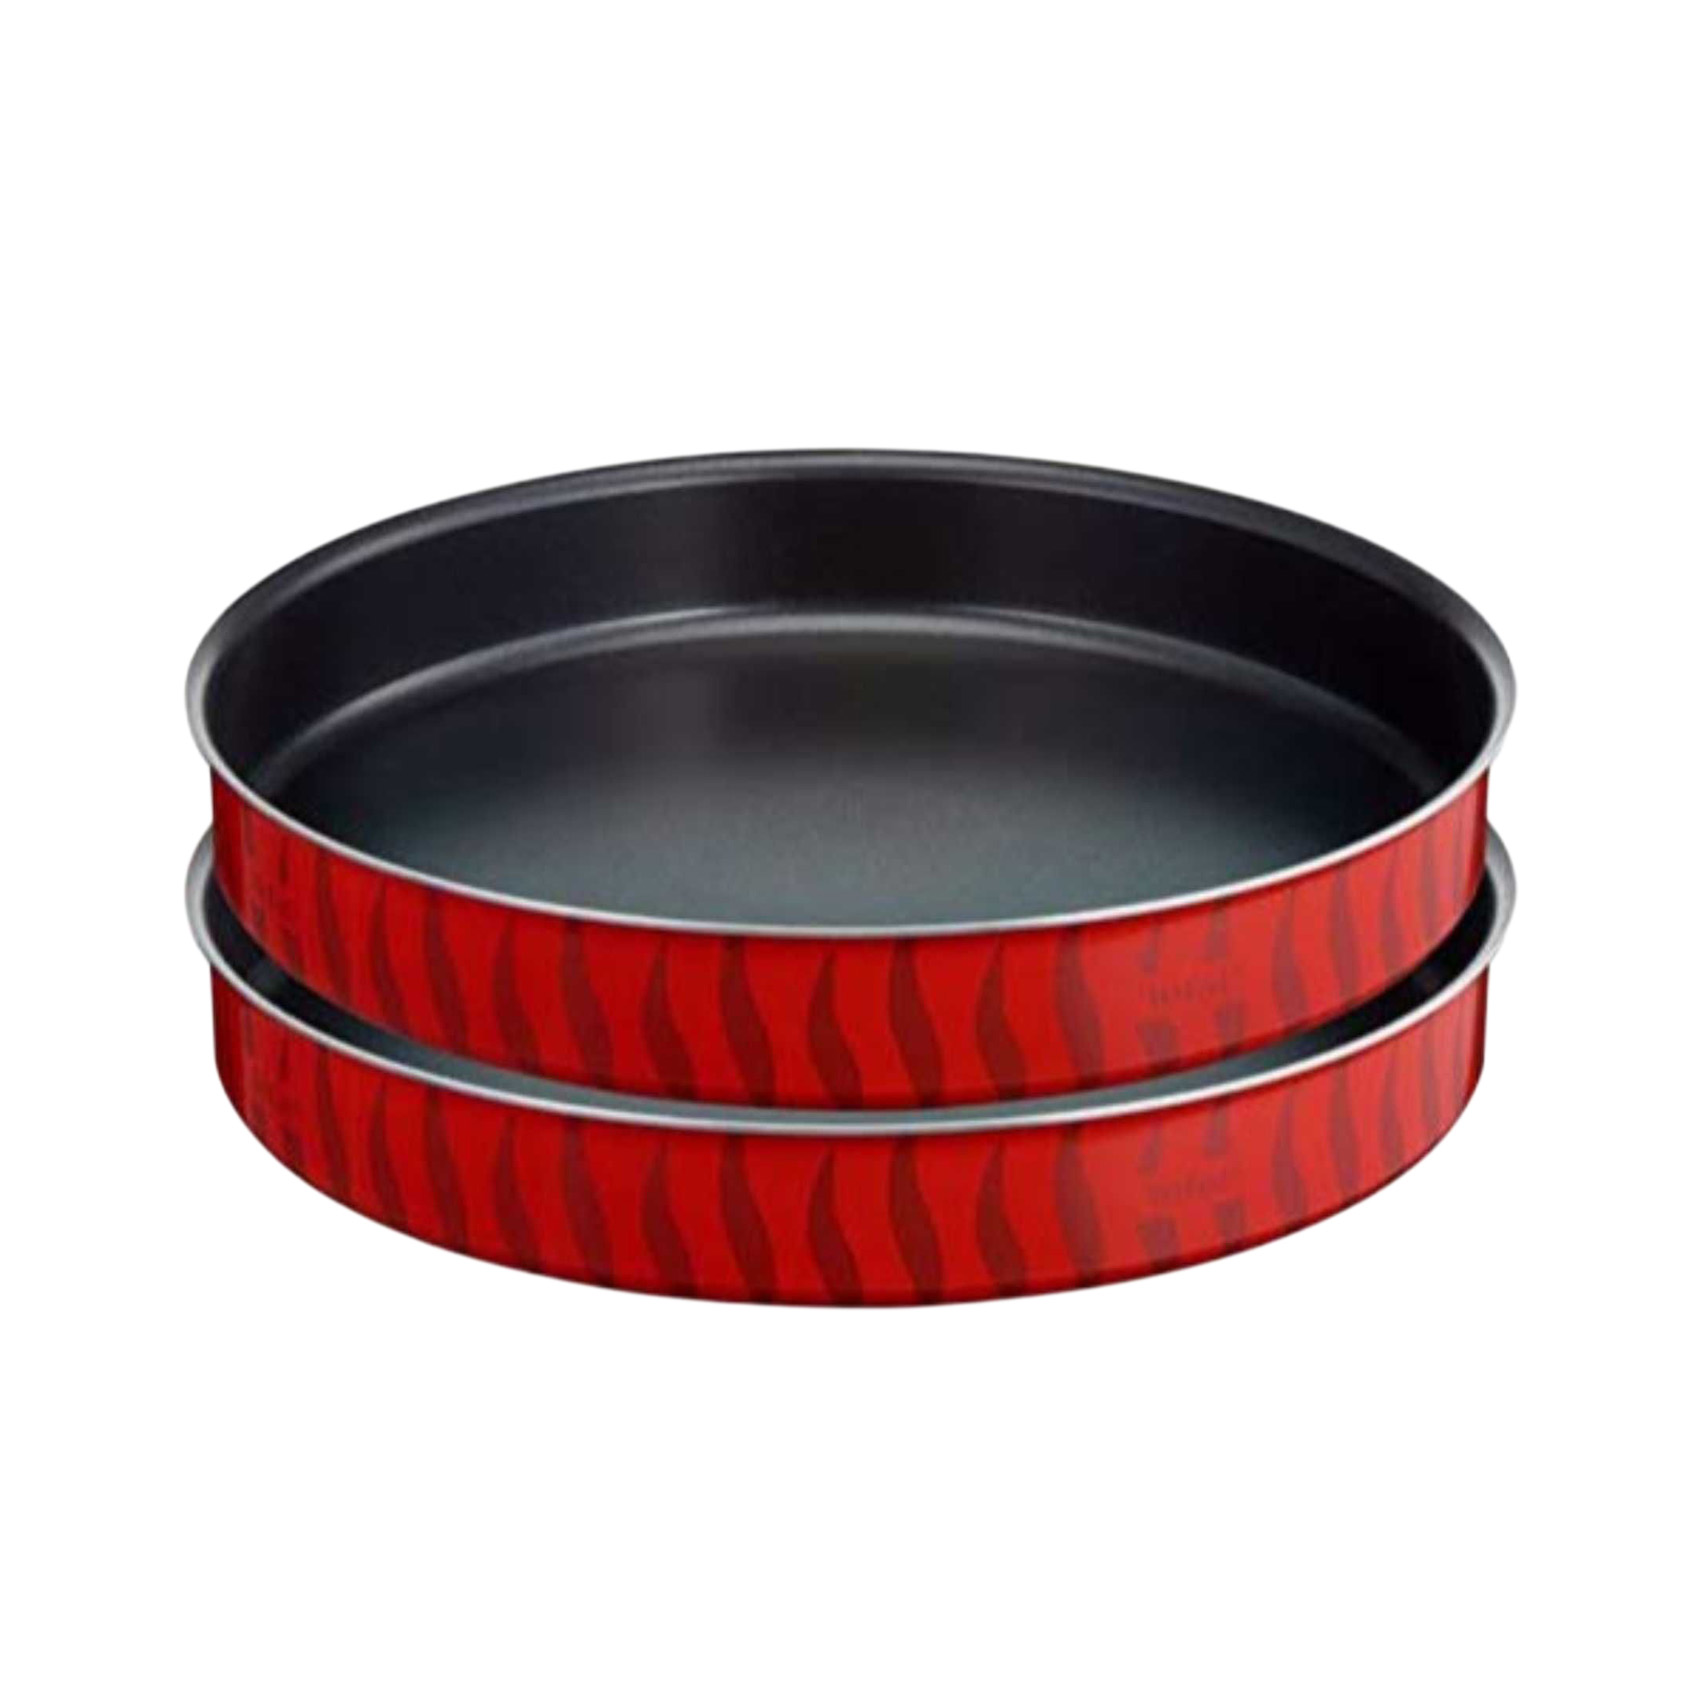 Tefal Specialist Oven Dish Set 2 Count